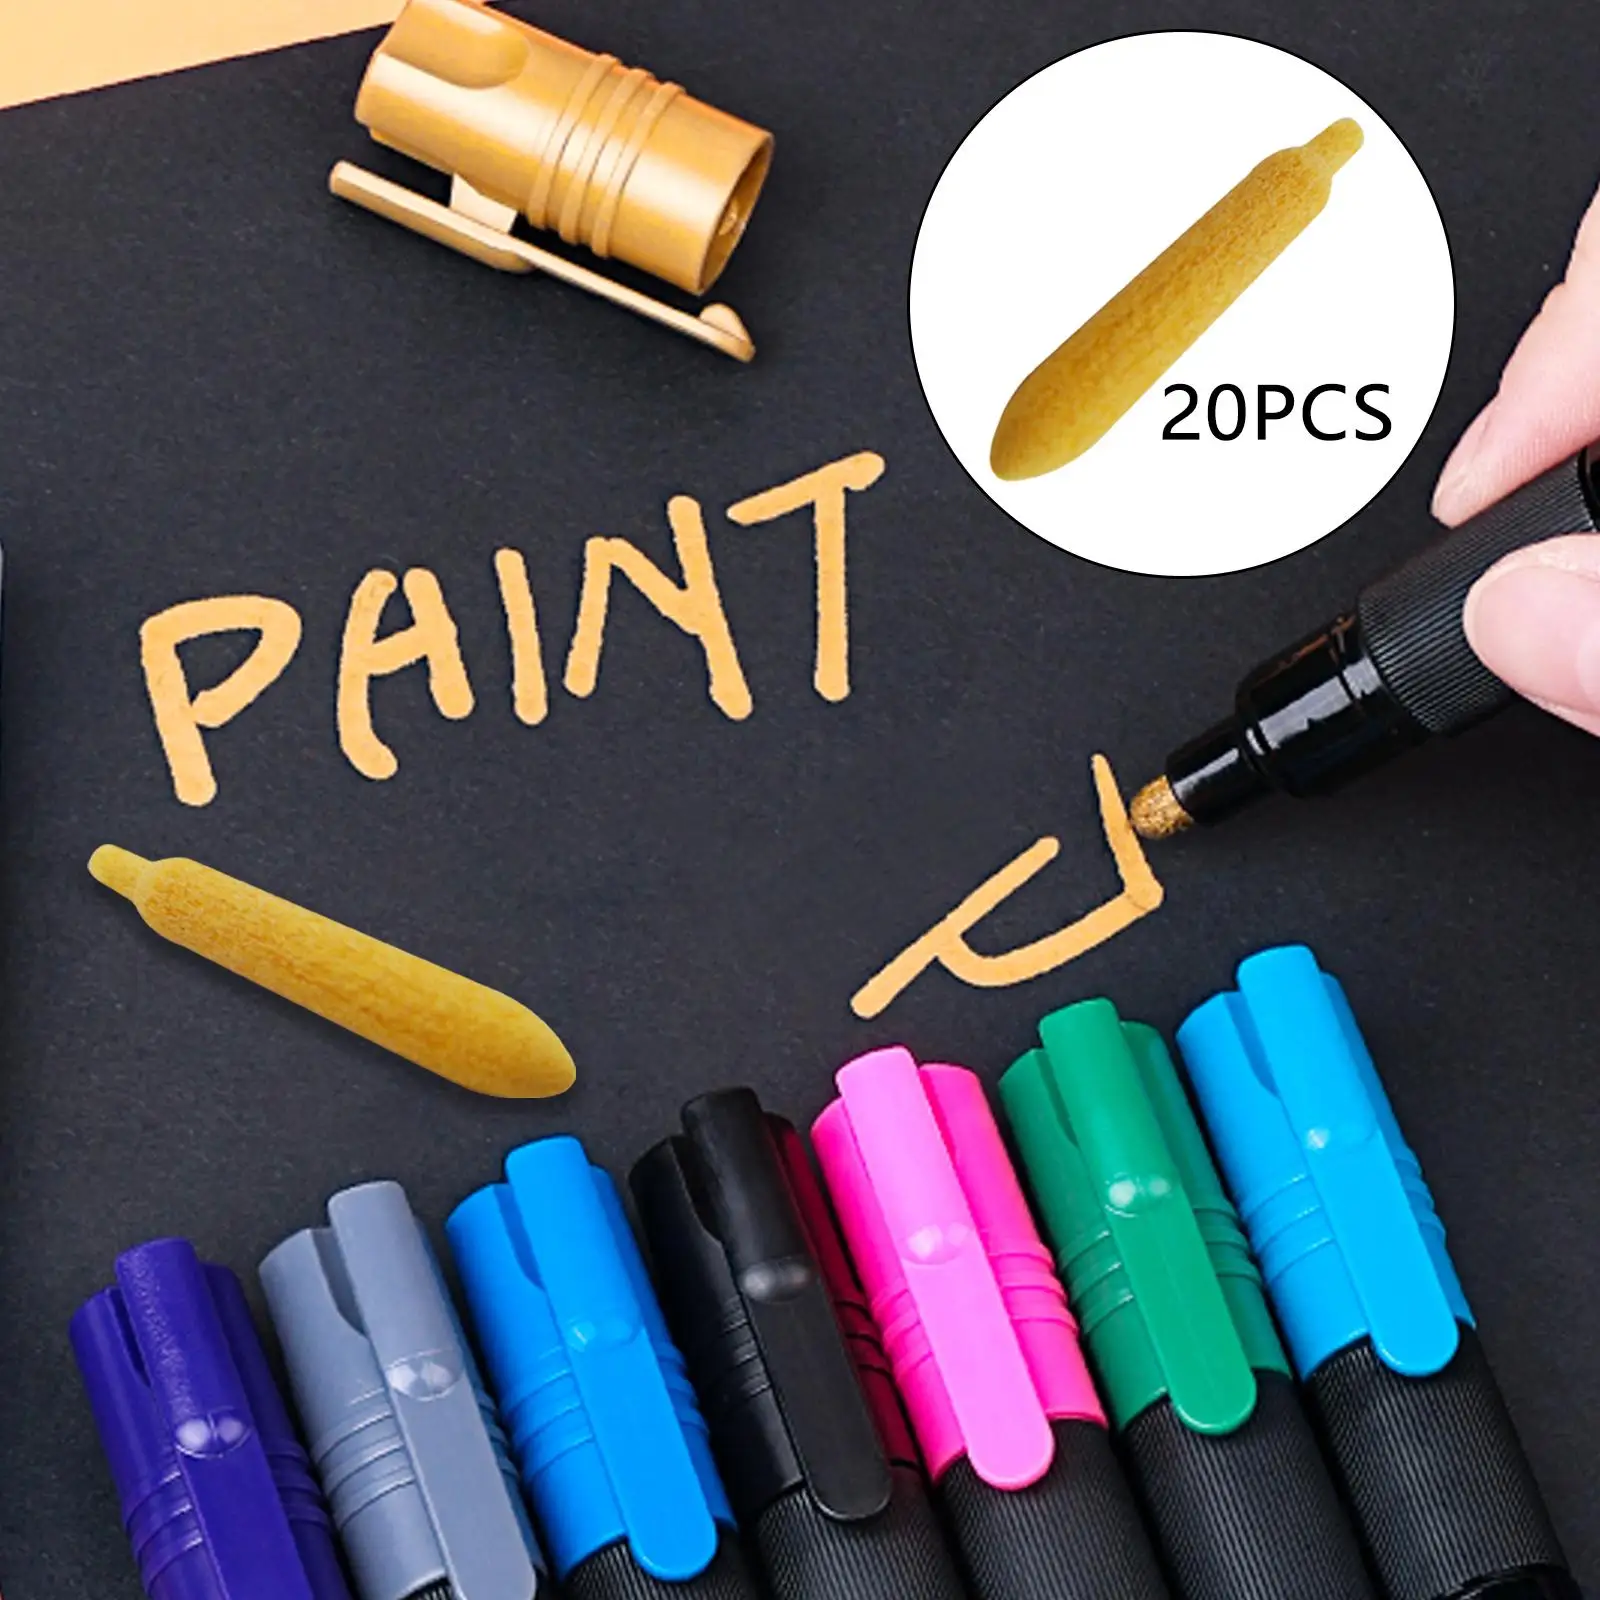 20Pcs Spare Replacement Nib Tips Pen Tips Refillable Paint Tool Acrylic Marker Nib for Art Lettering Paint Markers Calligraphy